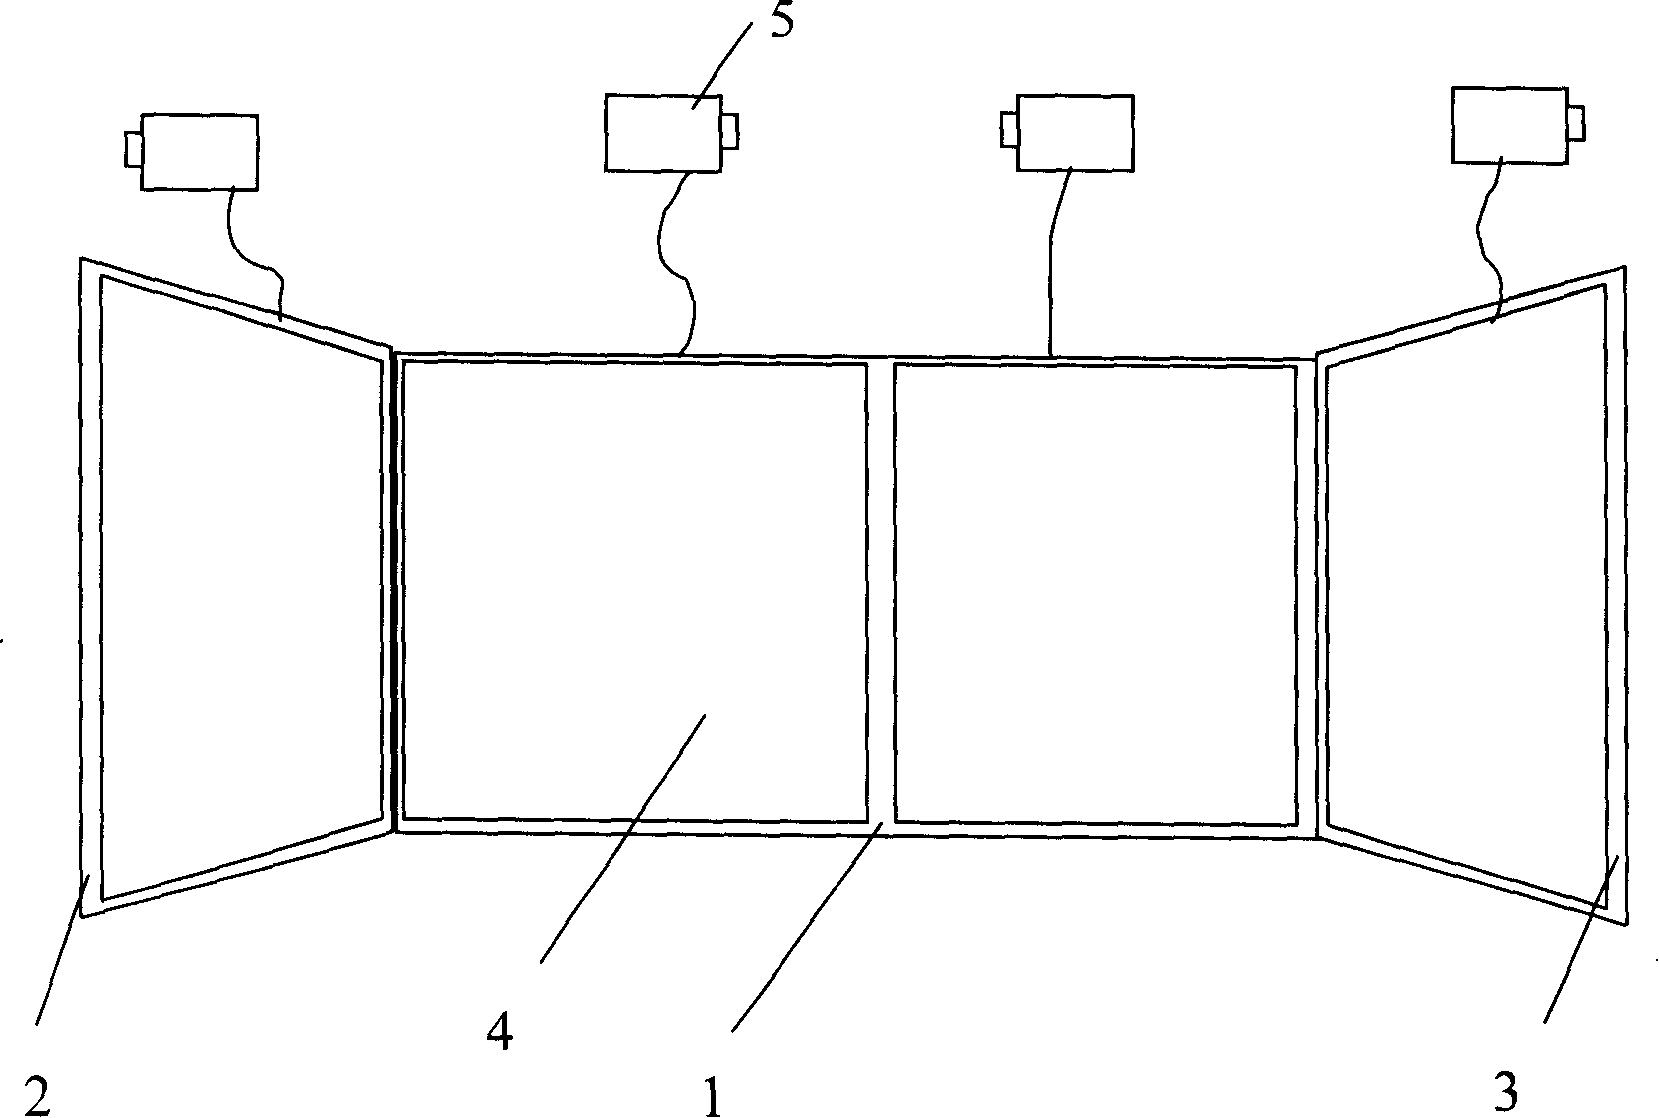 Vehicle window device for security ensuring vehicle